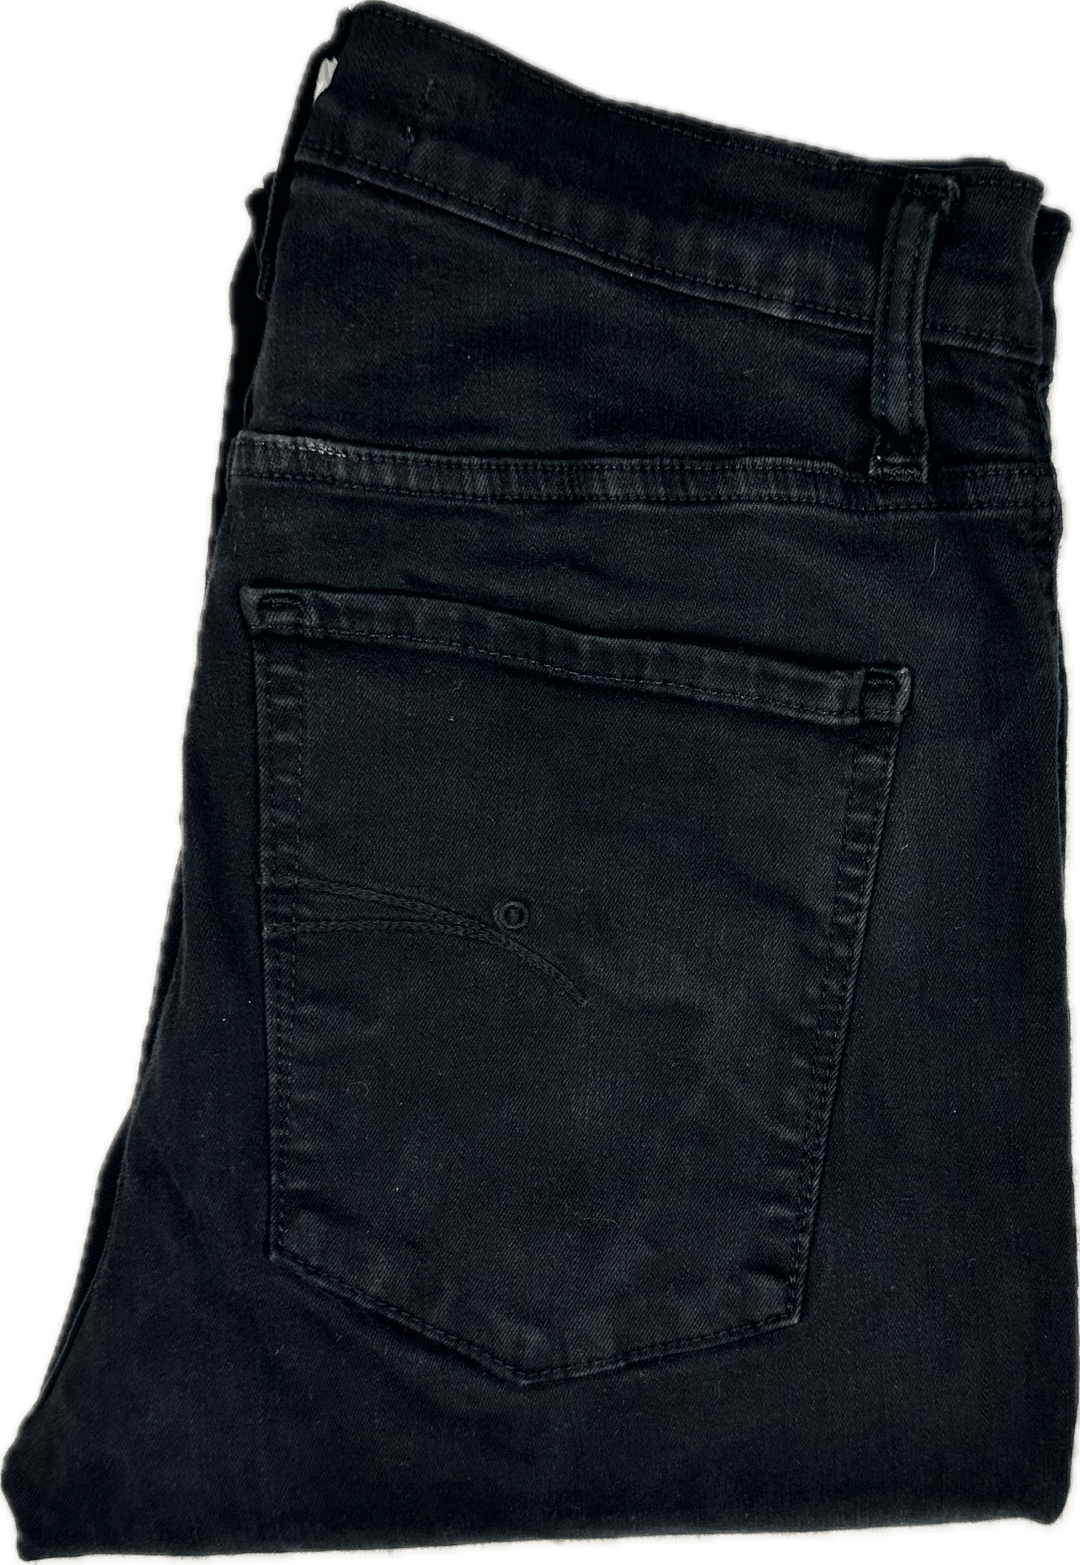 NOBODY Cult Skinny Ankle High Rise Black Jeans- Size 33 - Jean Pool